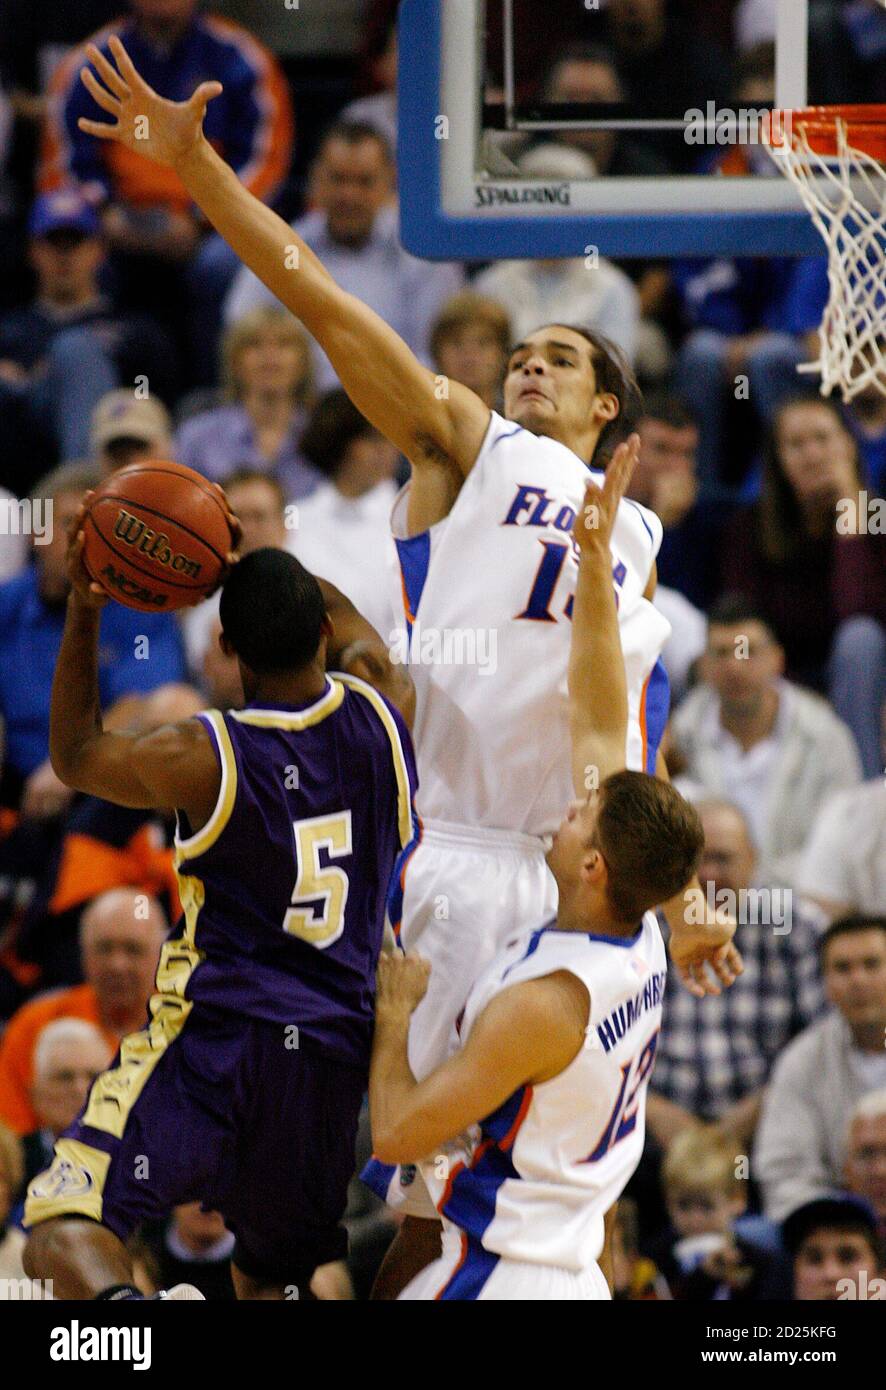 University of Florida Joakim Noah (13) and Lee Humphrey (12) prepare to  block the shot by Prairie View Derek Noore (5) in the first half of their  NCAA basketball game in Gainesville,